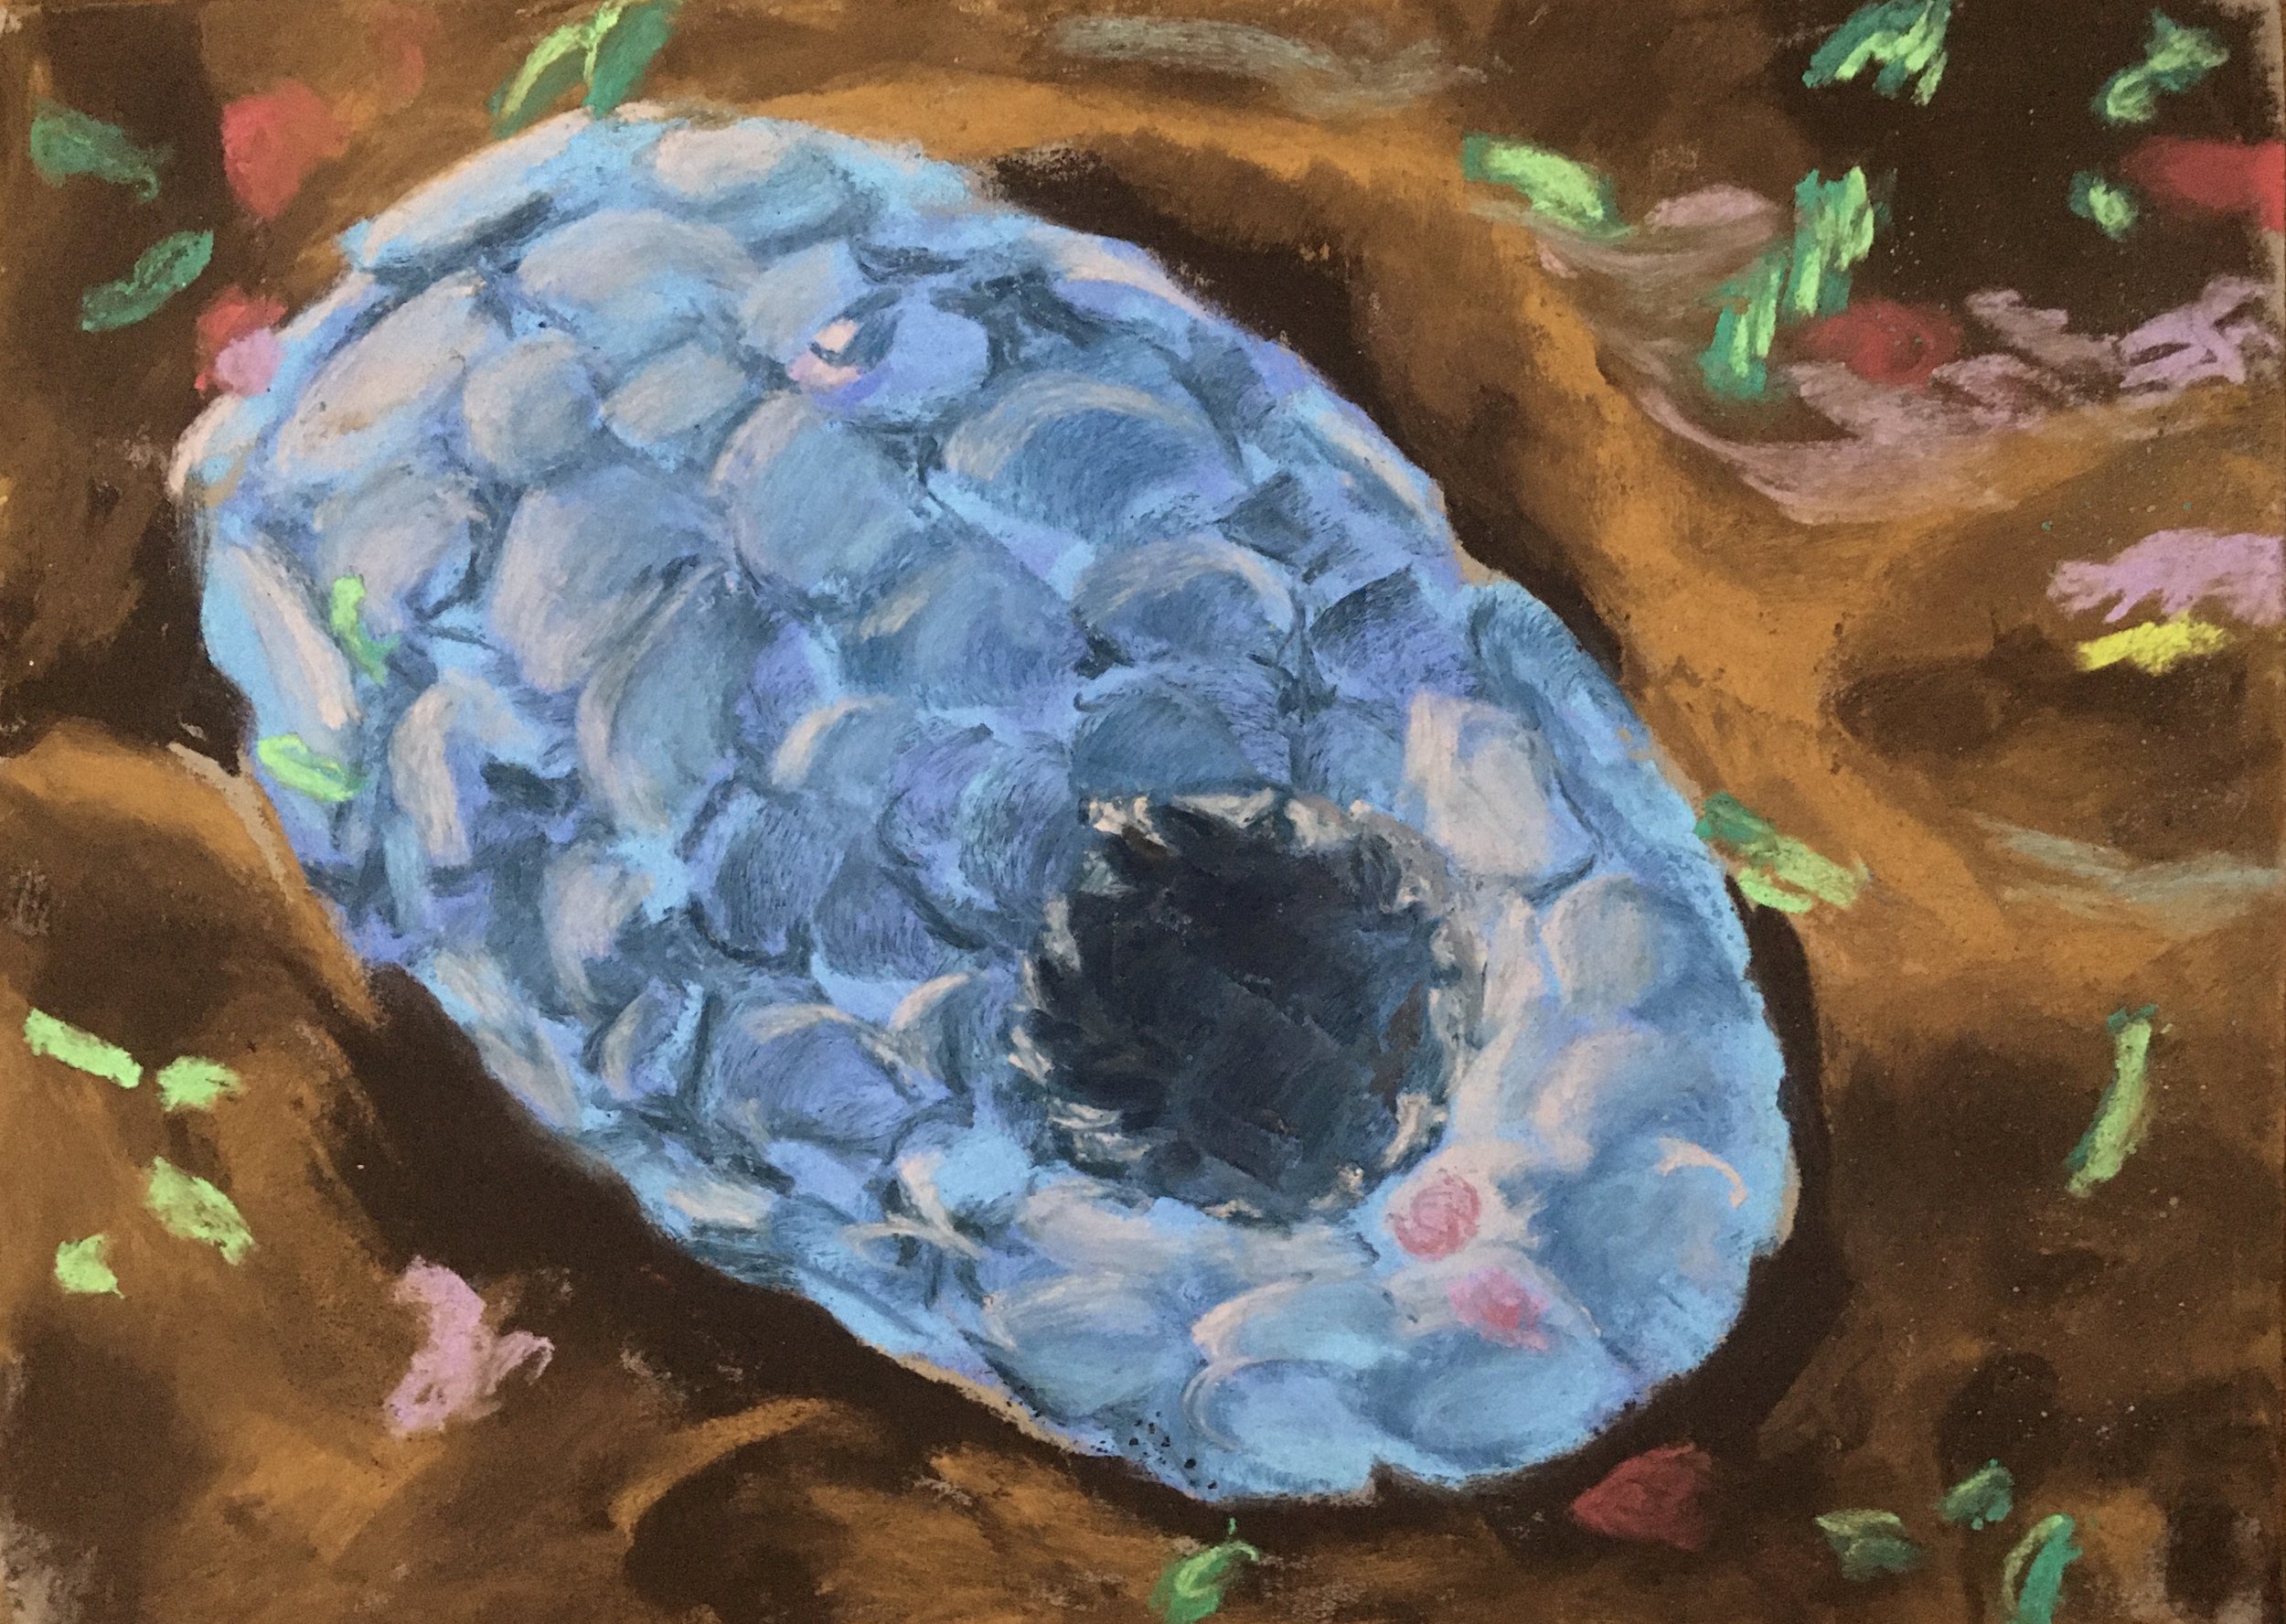 Microbacteria 2 (2022) Pastel on Paper 12"x9"